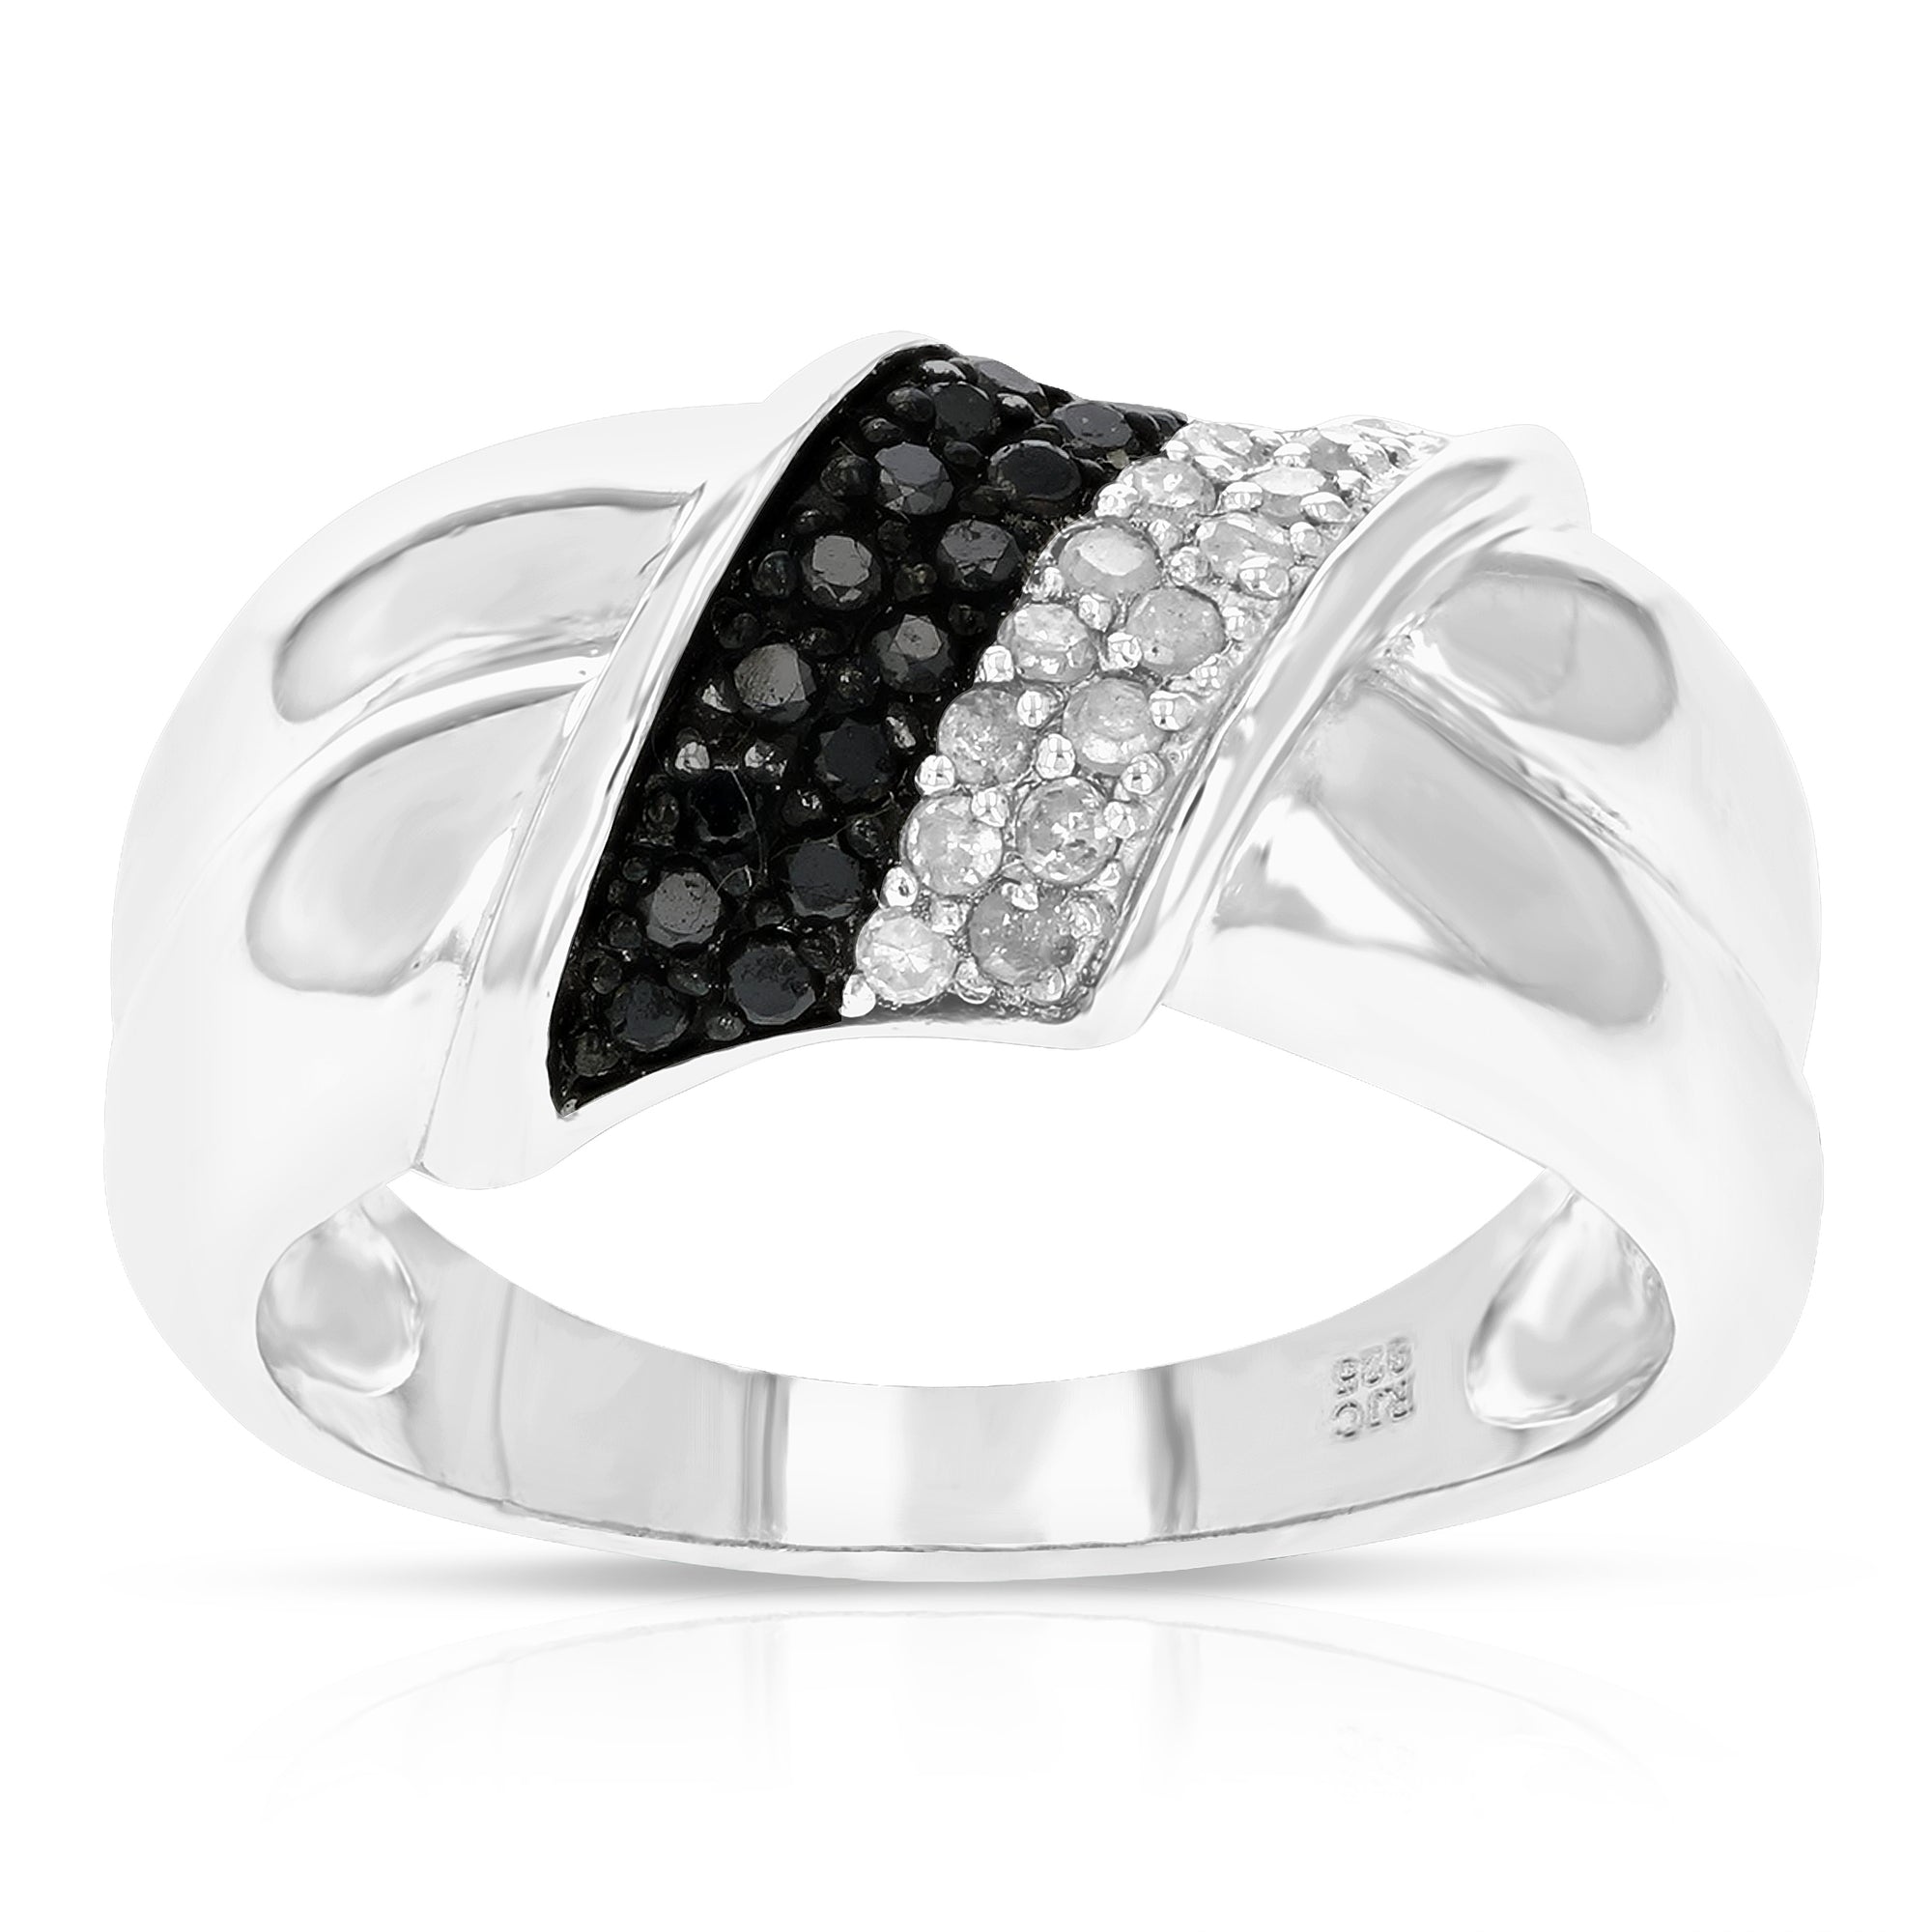 Sterling Silver Black Diamond Ring (0.30 cttw) Size 7